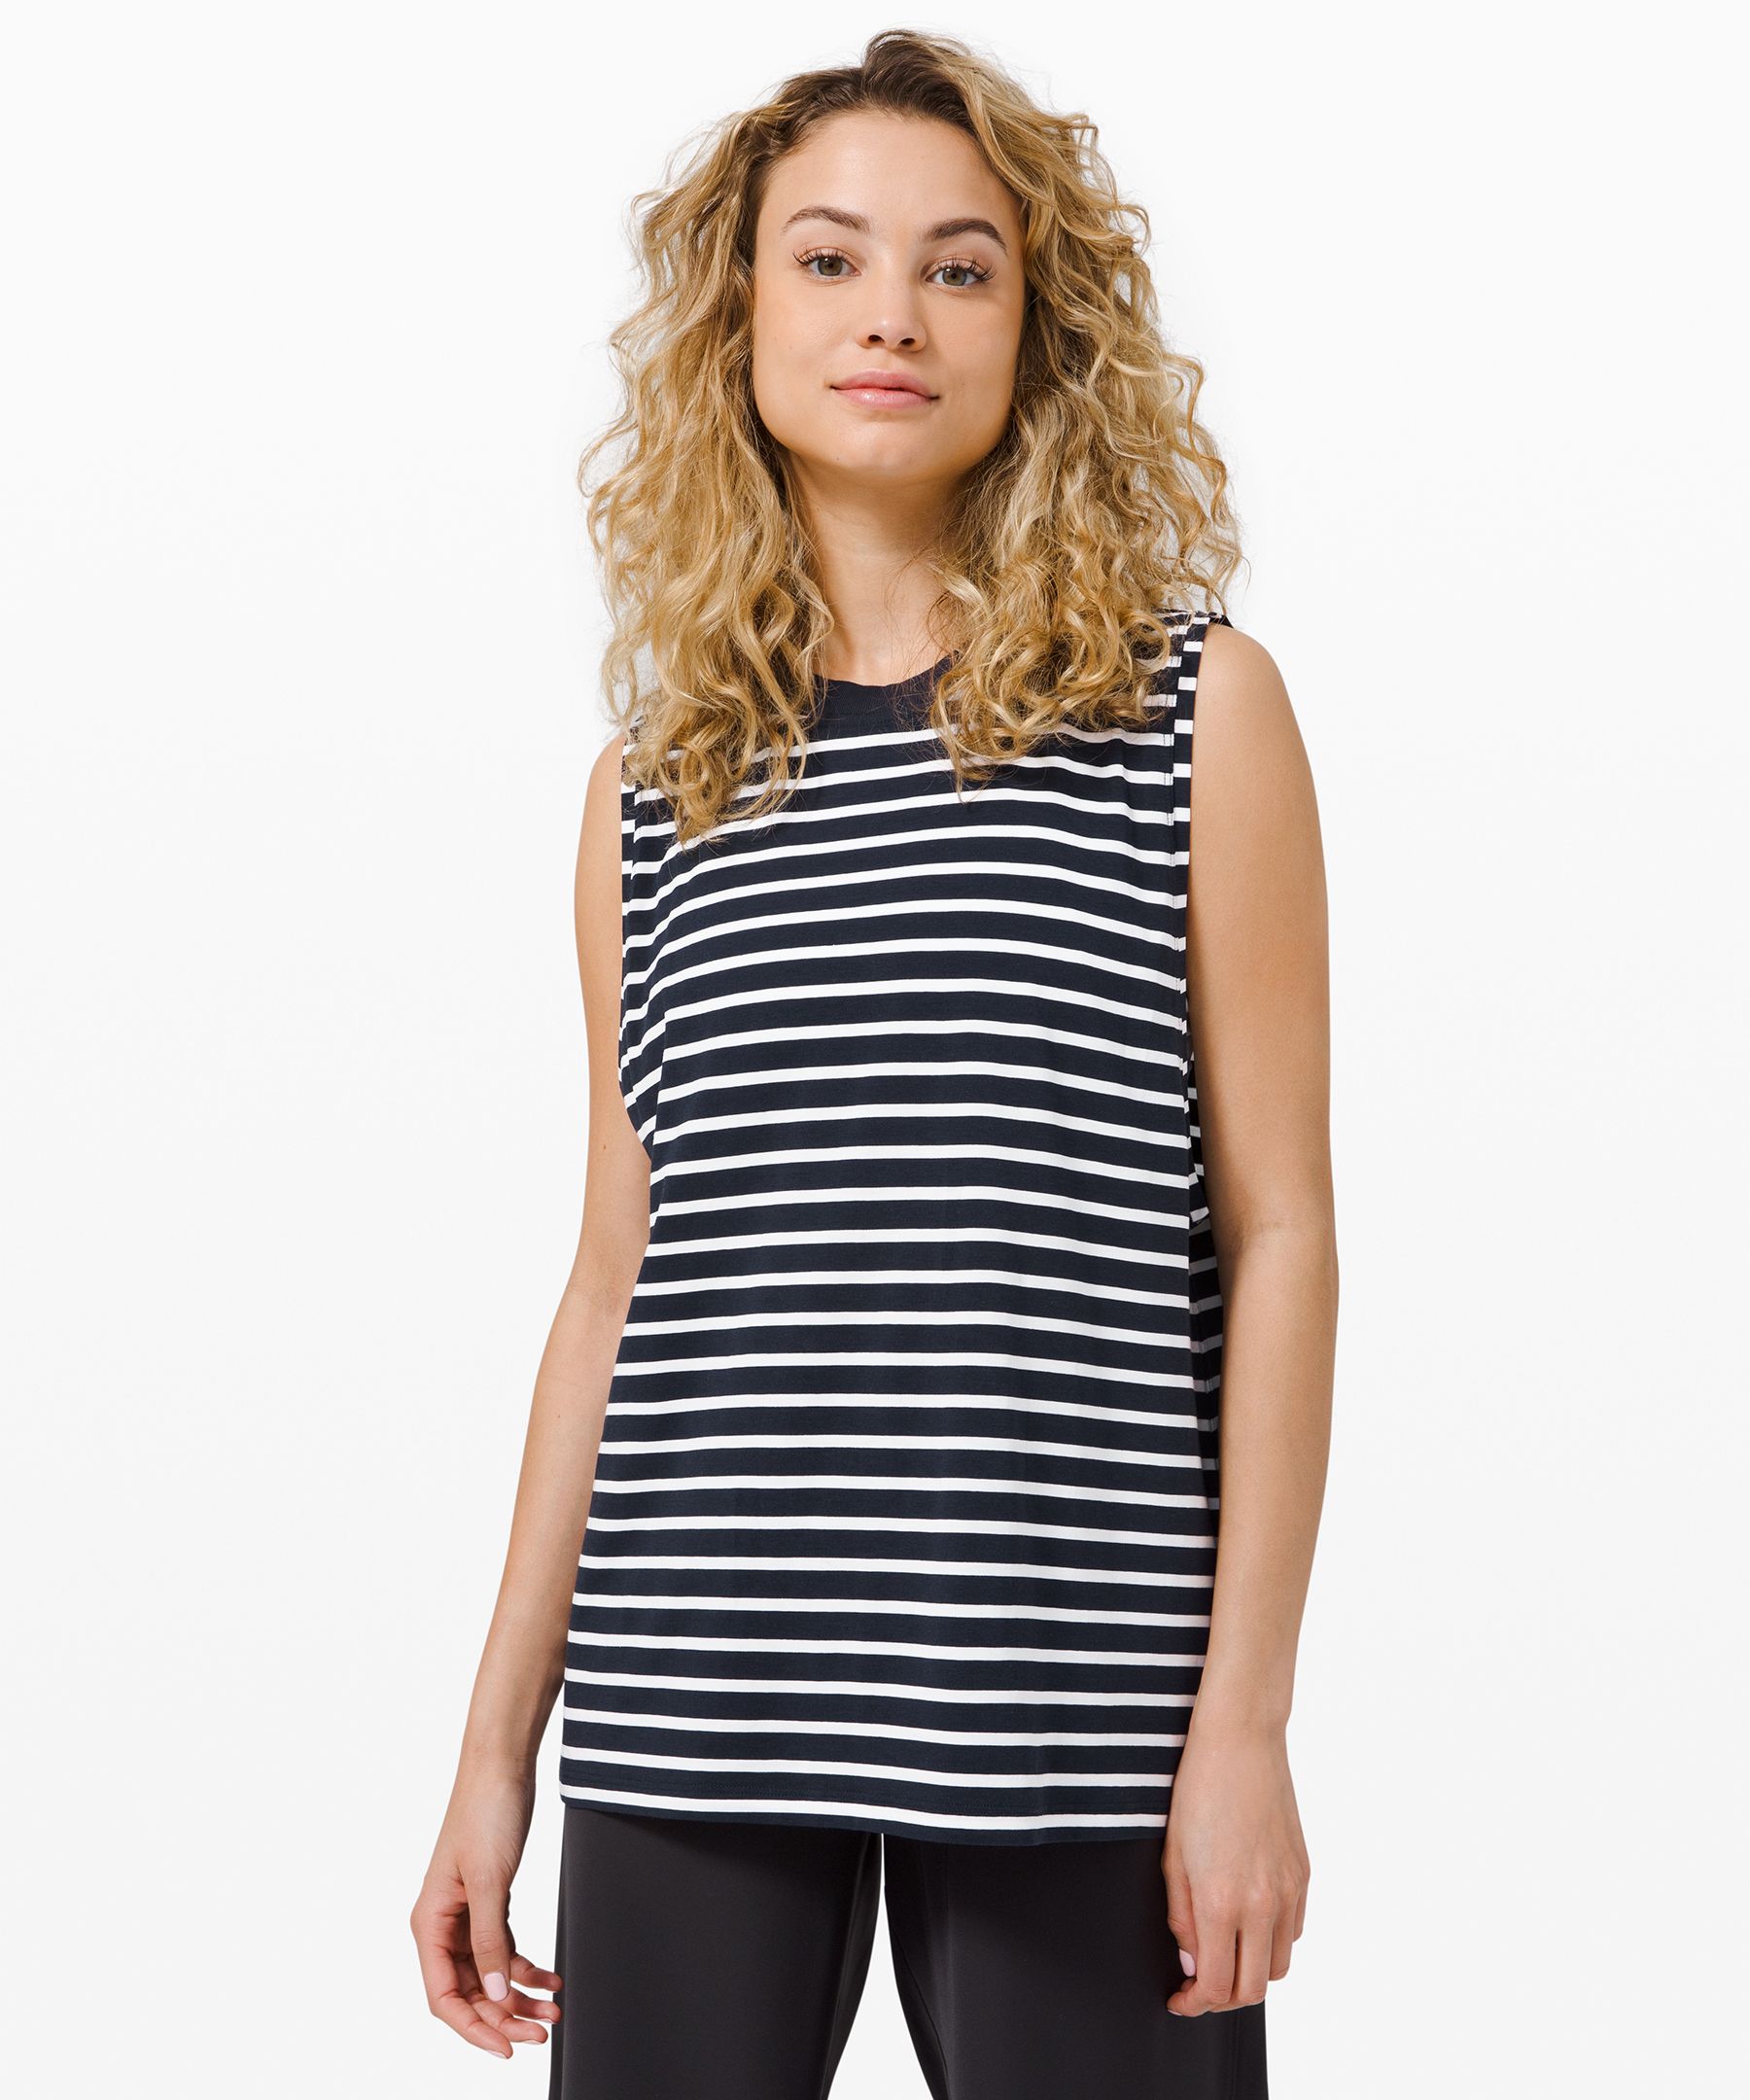 Lululemon All Yours Tank In Navy